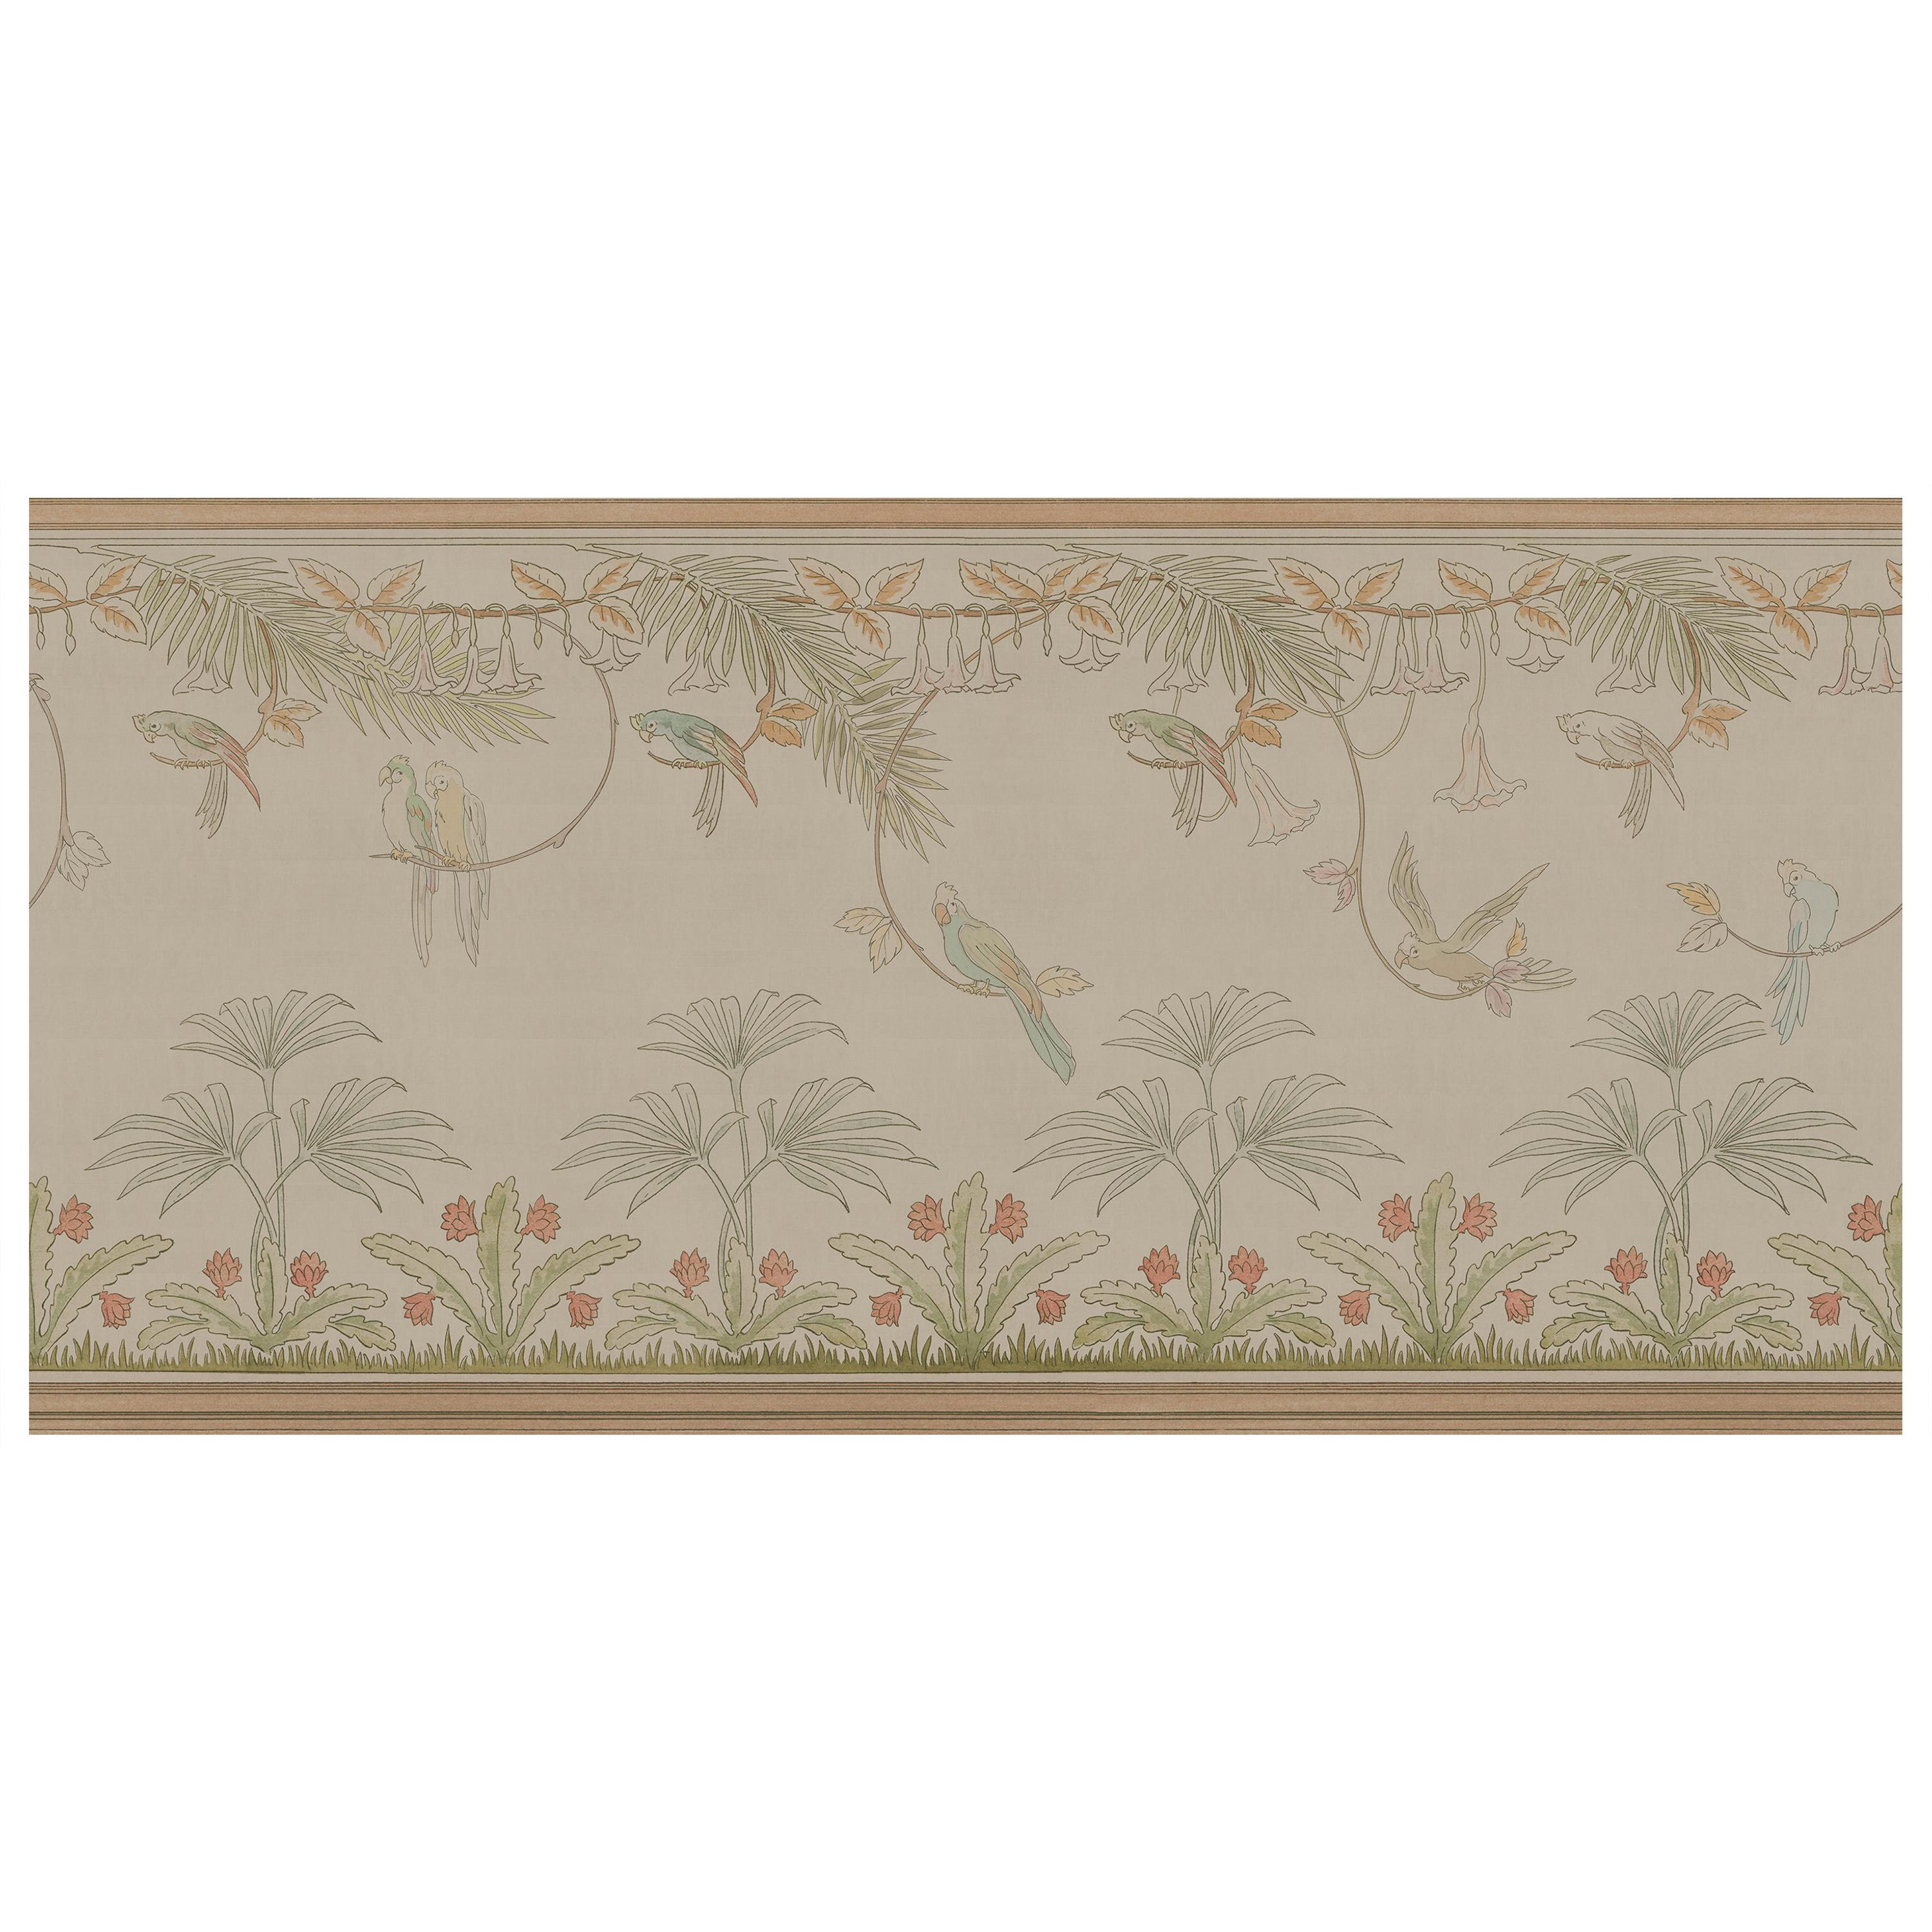 Ornami Art Nouveau Parrots Vinyl Wallpaper Made in Italy Digital Printing For Sale